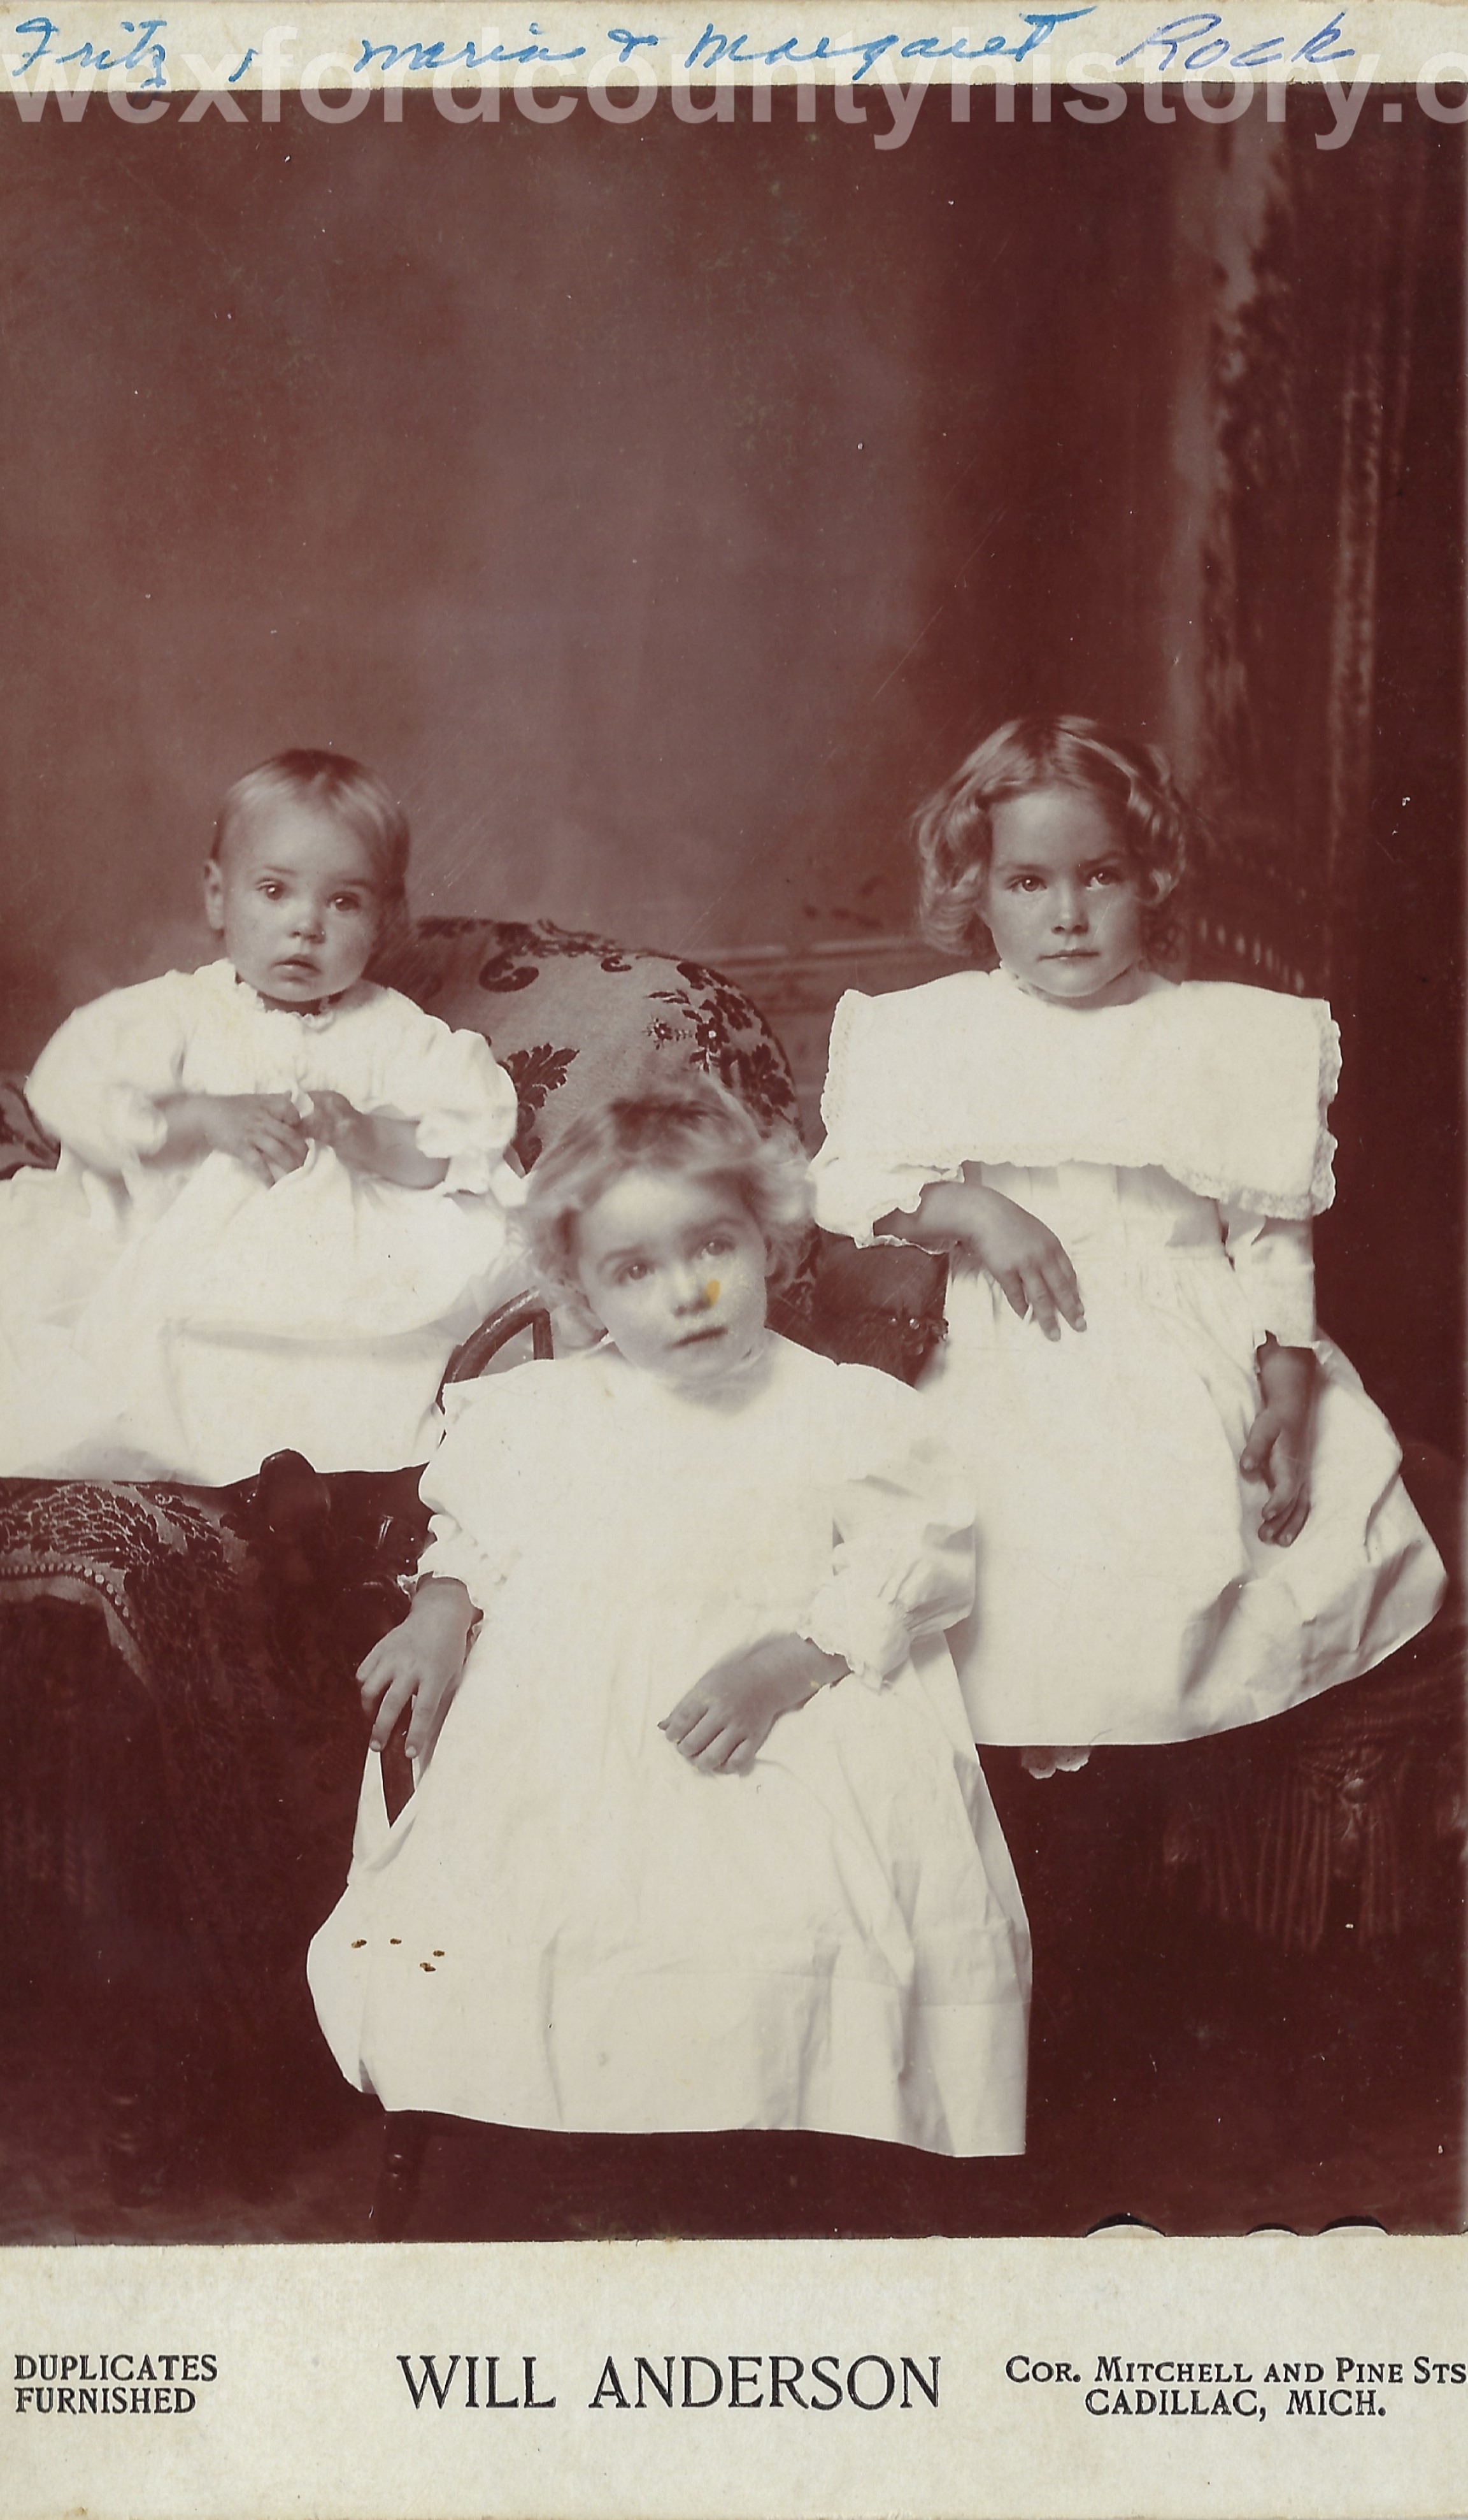 Fritz, Maria, and Margaret Rock